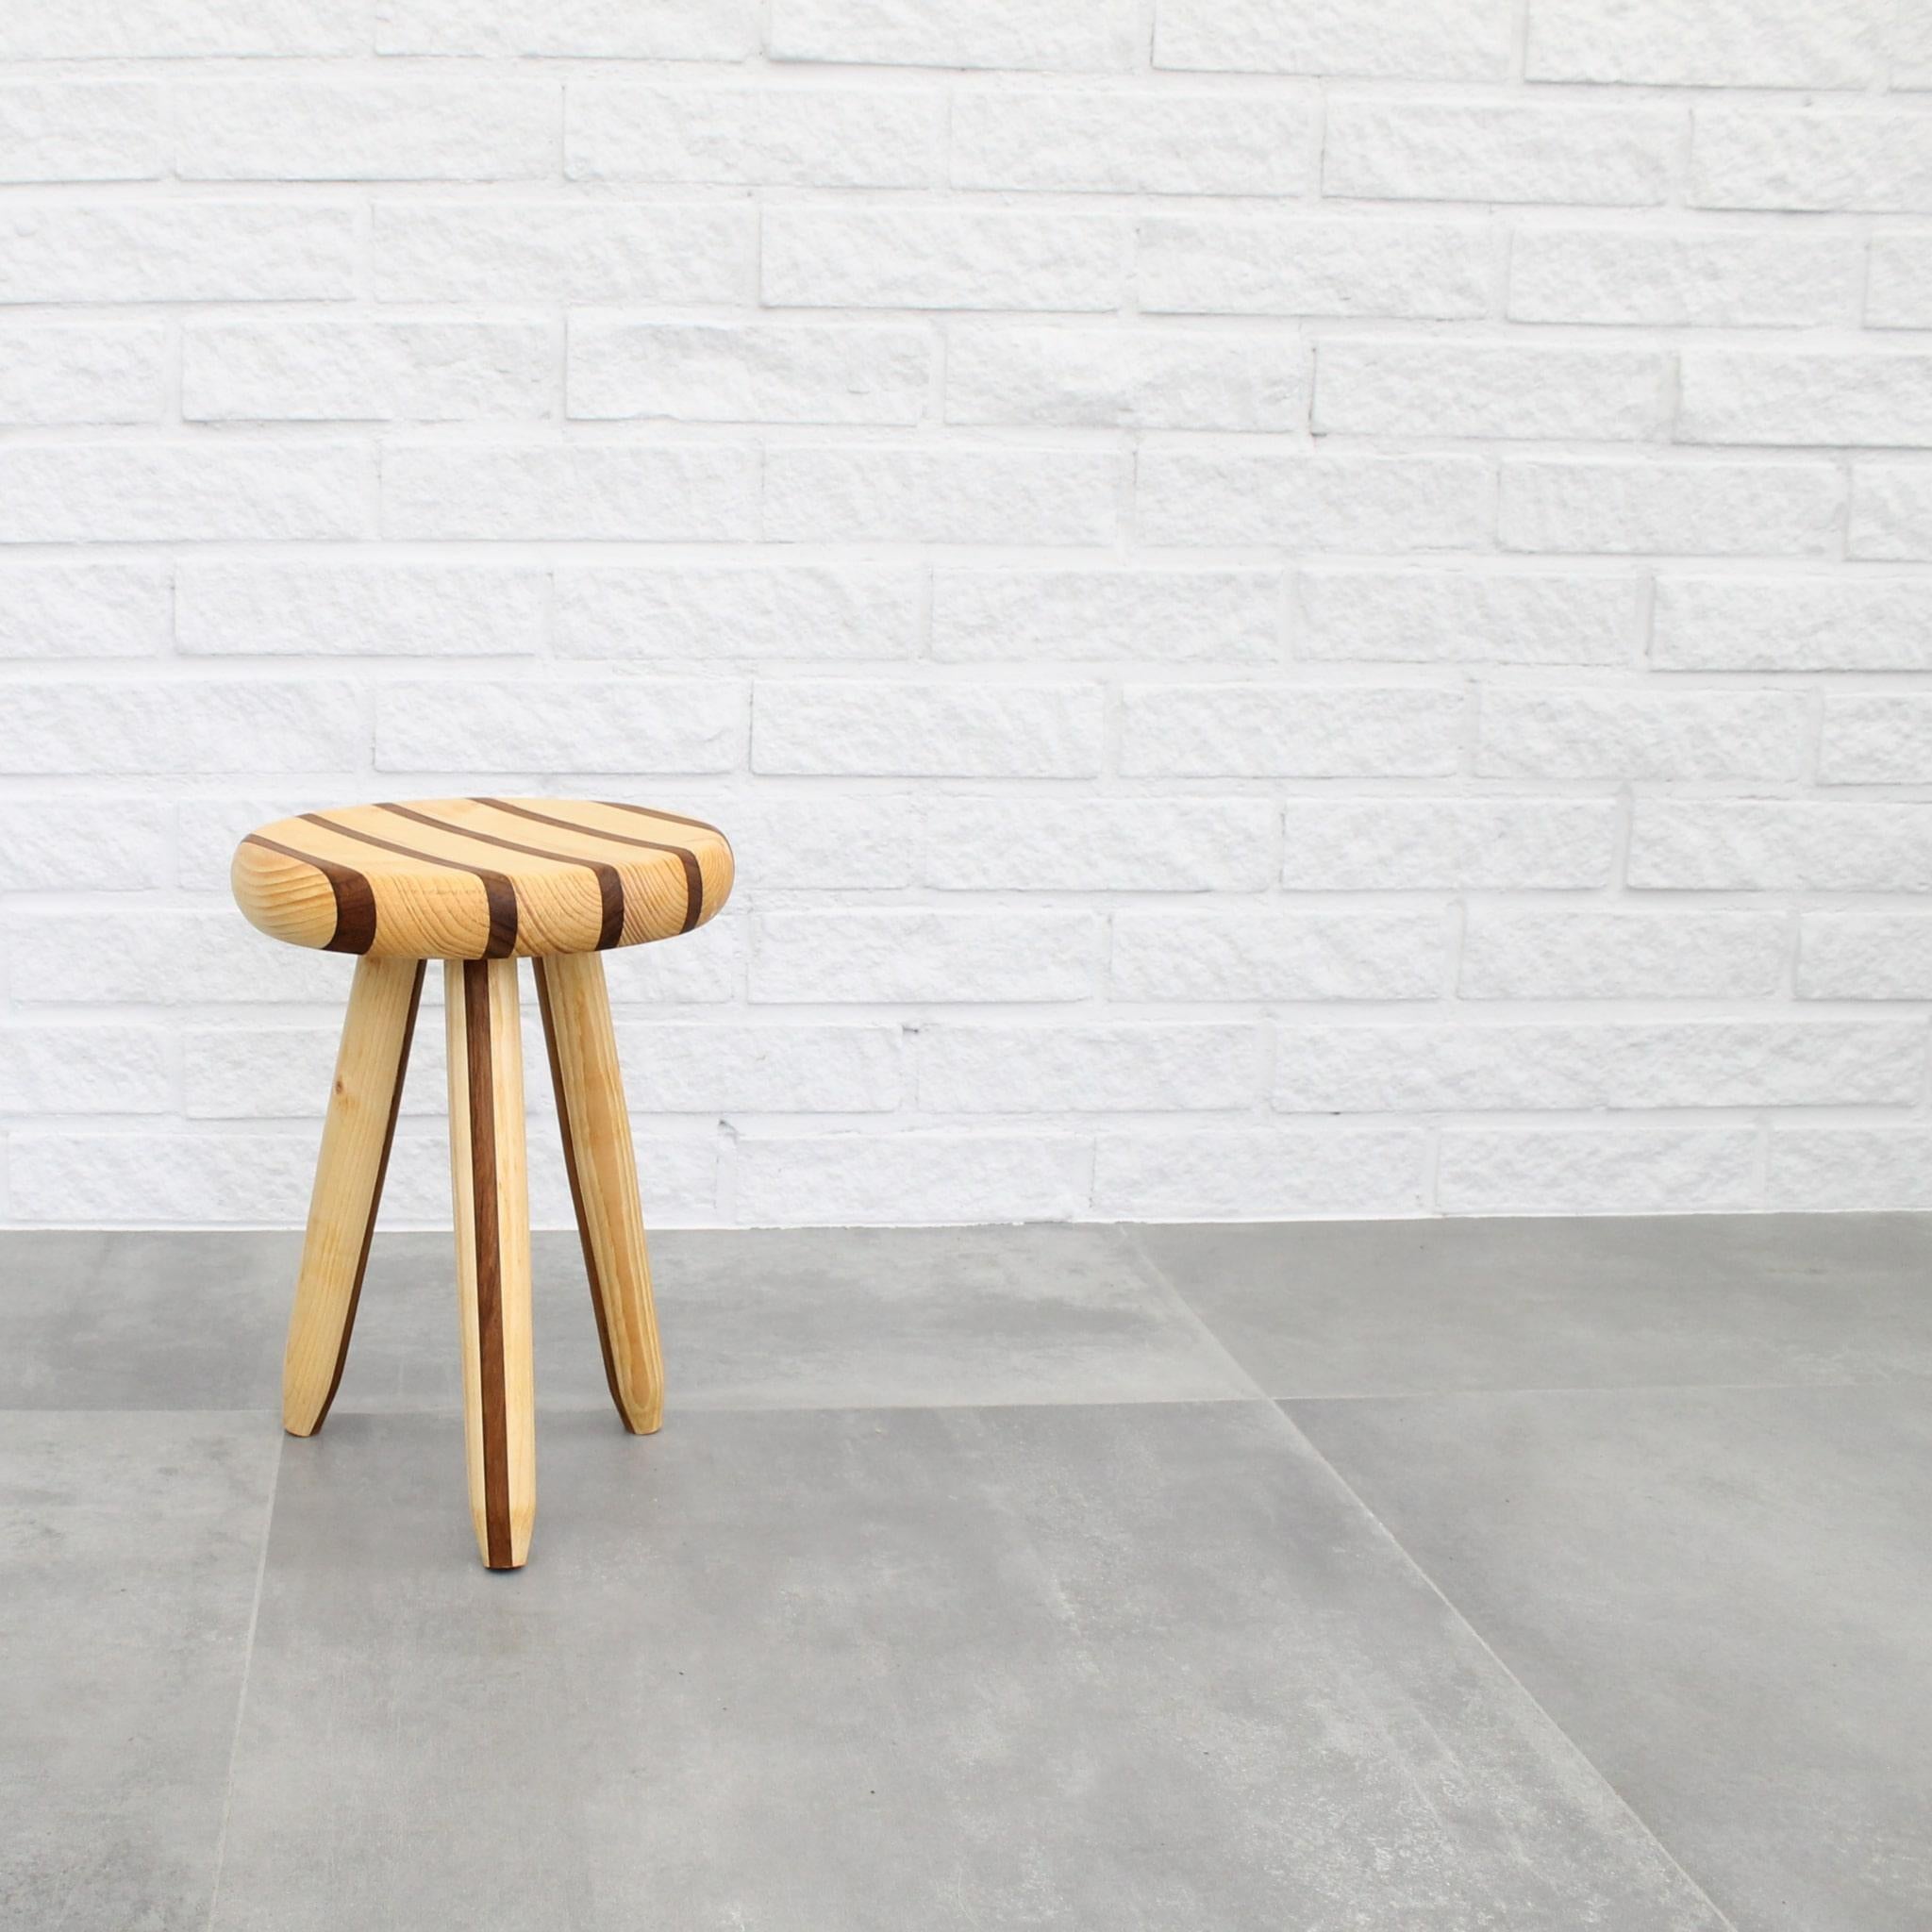 Turned Swedish milking stool in pine and teak by Andreas Zätterqvist